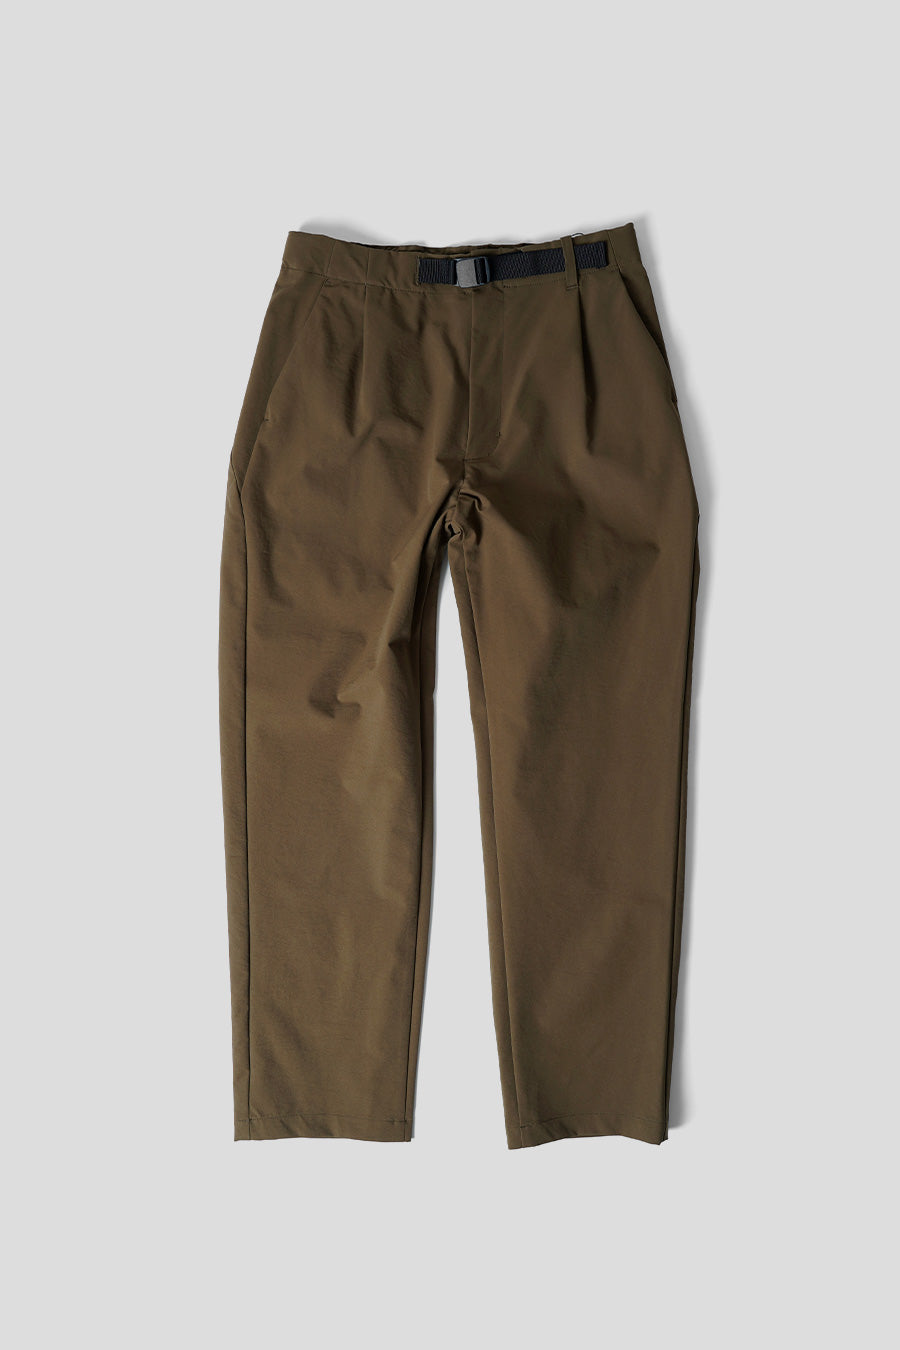 GOLDWIN - BROWN ONE TUCK TAPERED STRETCH PANTS